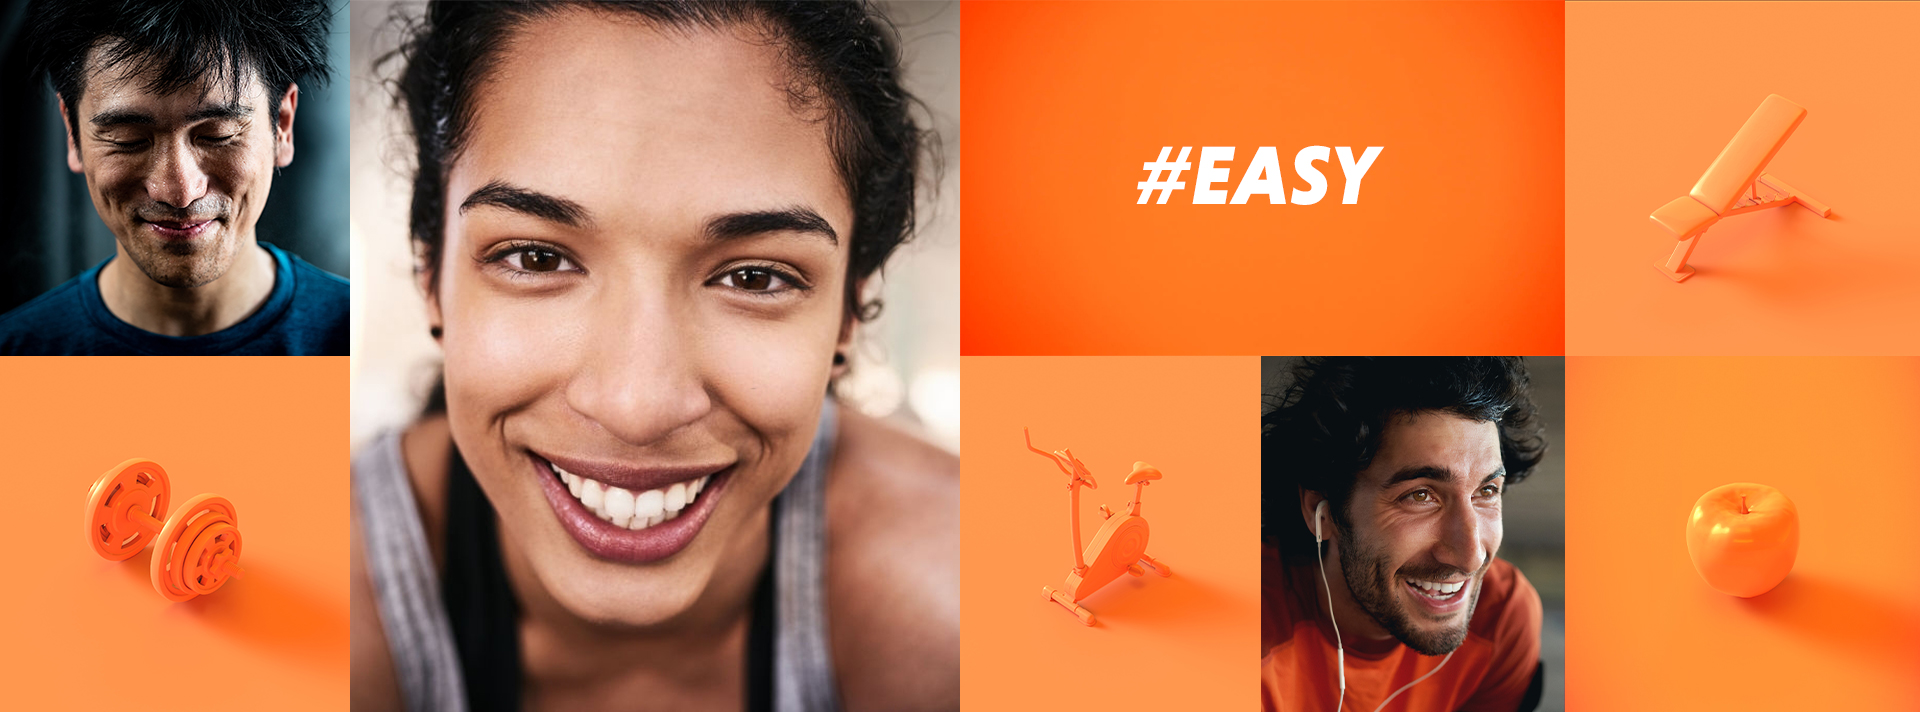 Photomontage of several elements that characterize easyGym. Three photos of smiling people, objects related to sport and health with shades of orange: dumbbells, running bike, apple